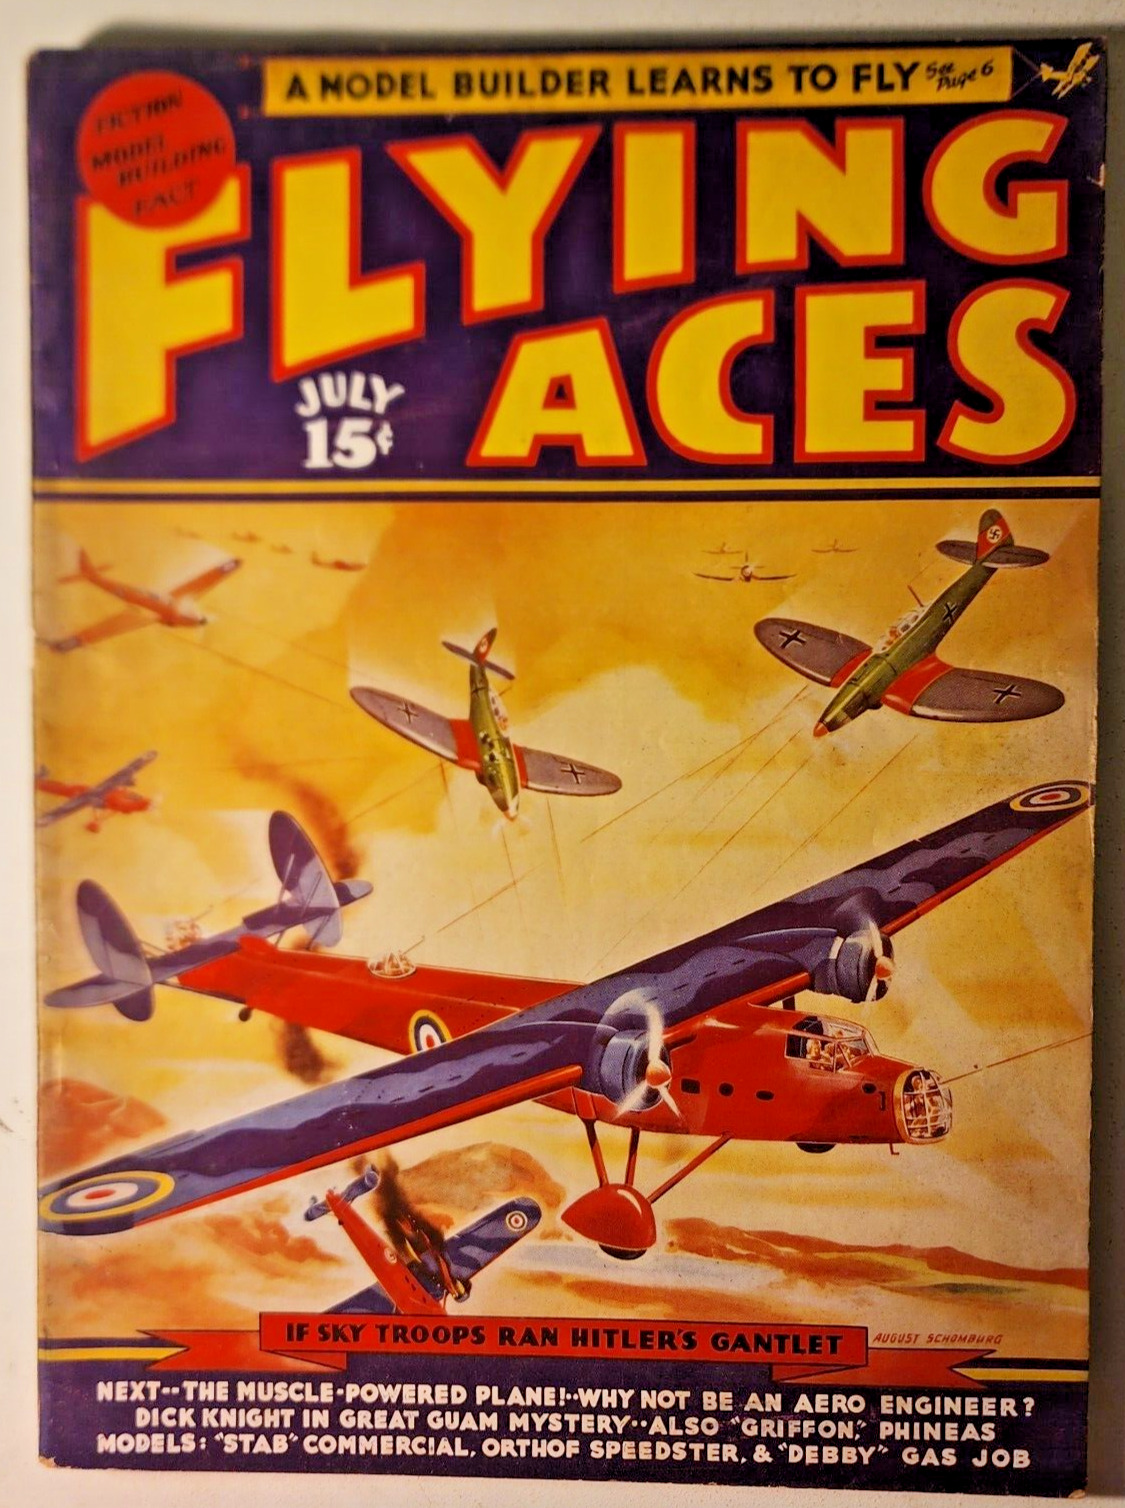 Flying Aces July 1939